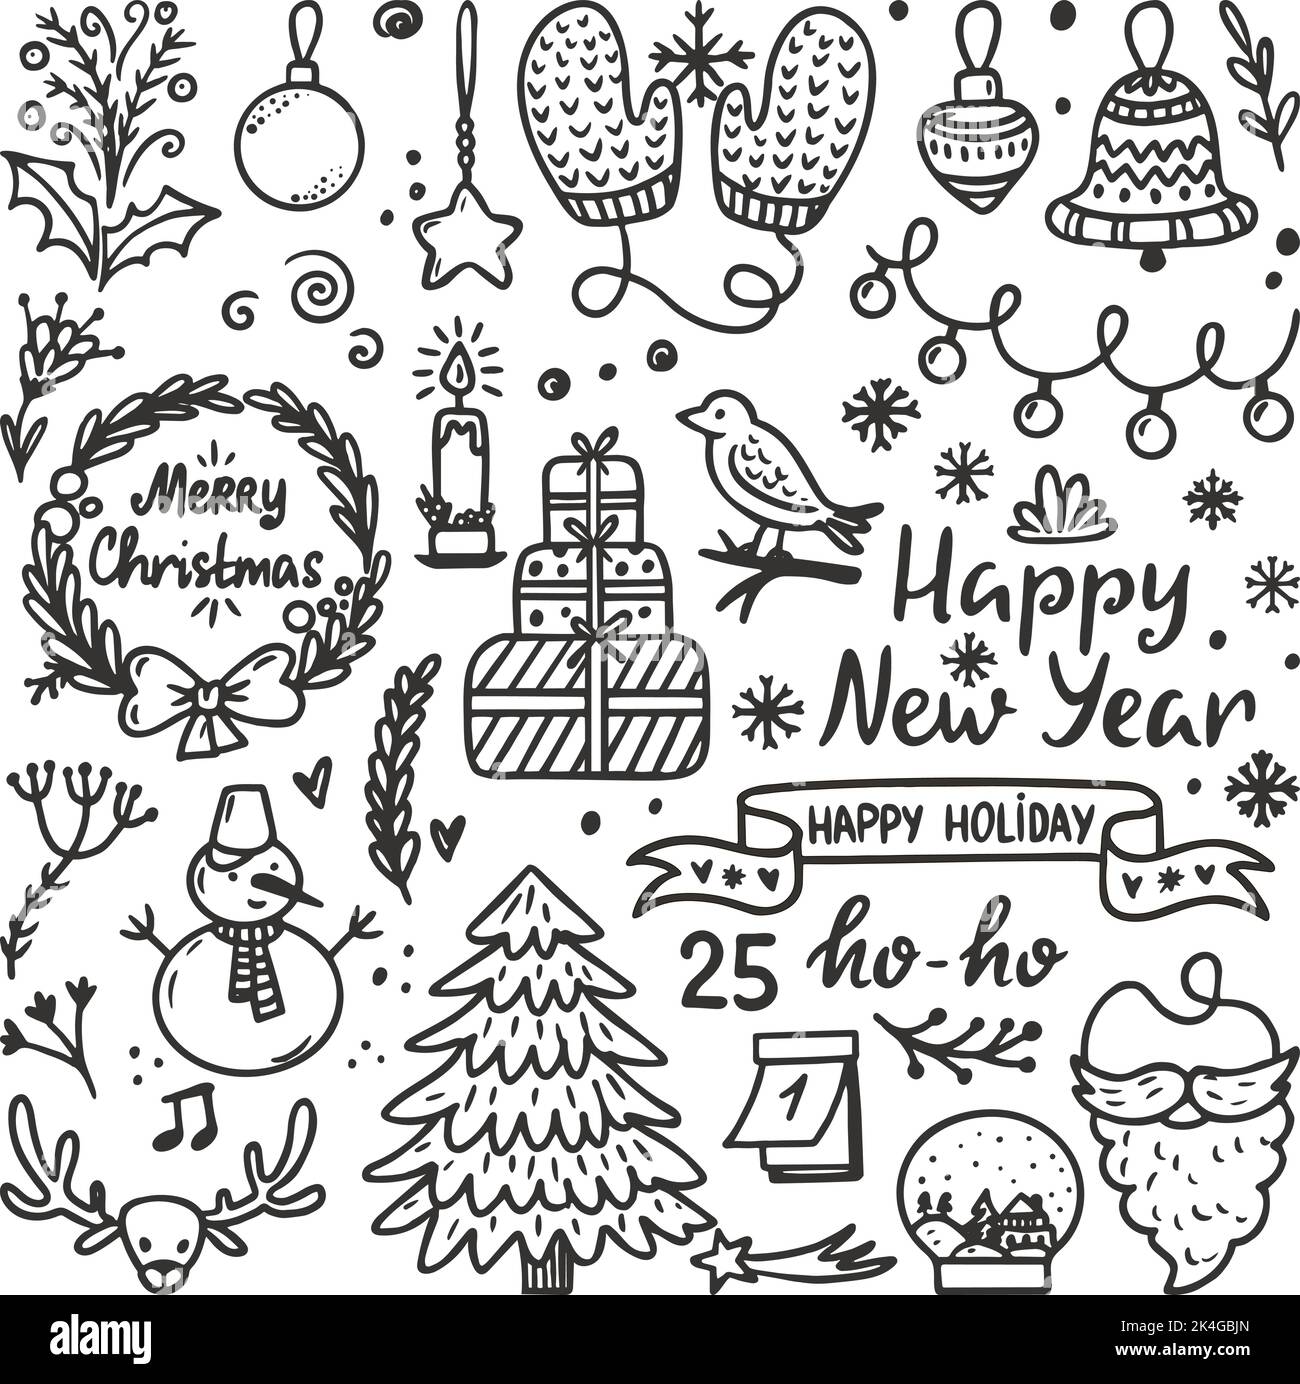 Doodle christmas isolated holiday elements. Holly xmas winter plants, present boxes and toys. Hand drawn decorations, art sketch neoteric vector clipa Stock Vector